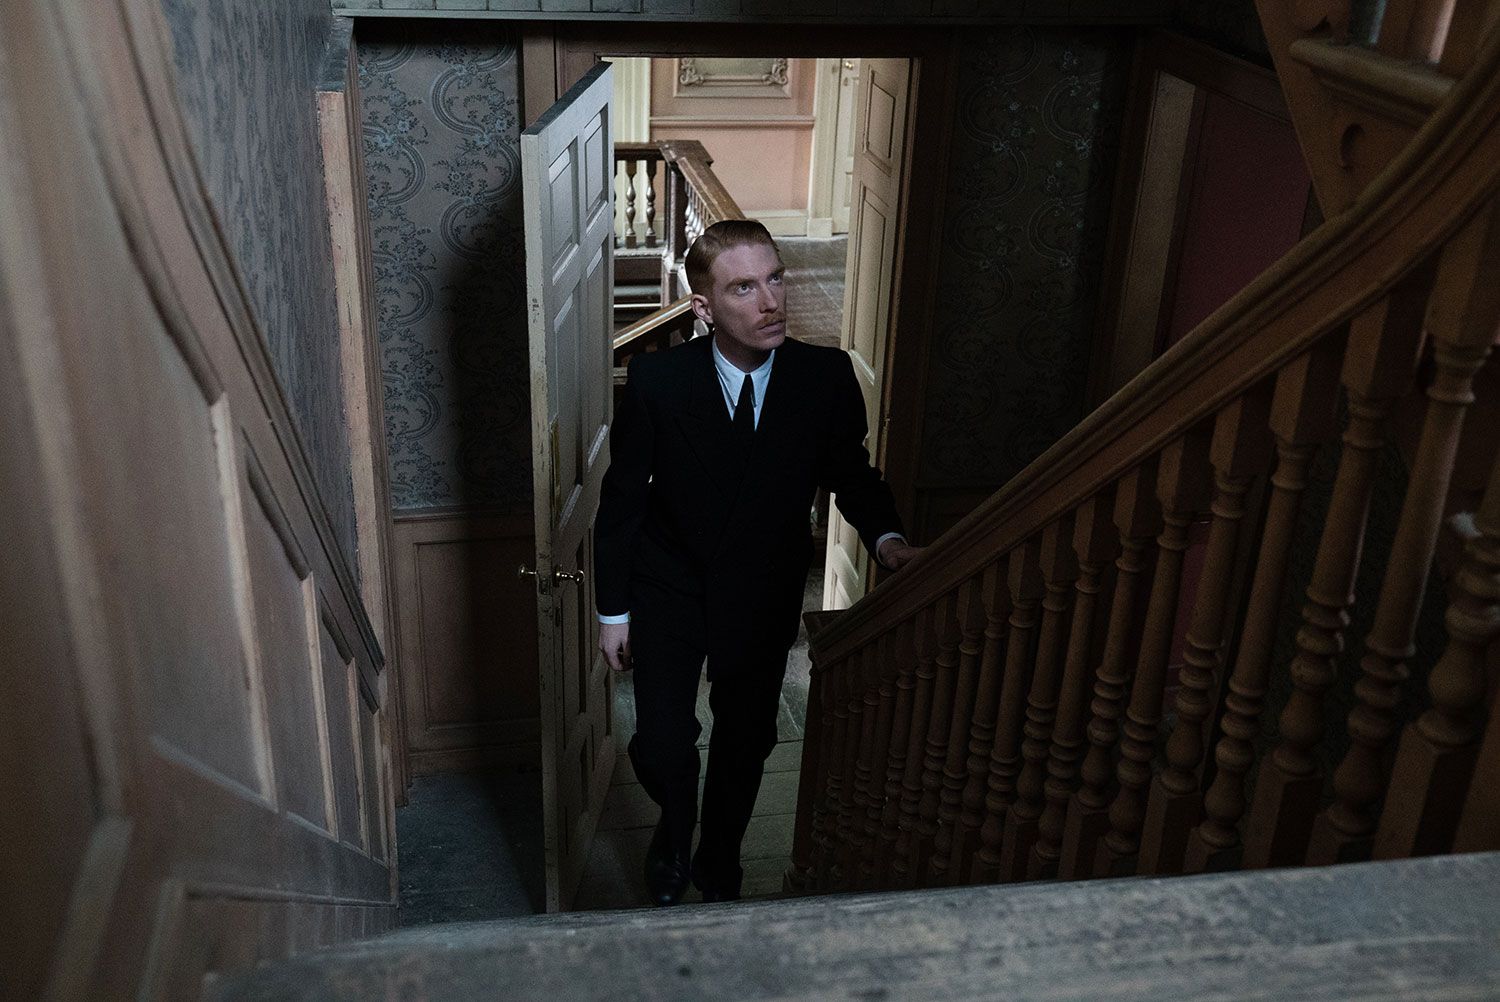 Domnall Gleeson stars as “Dr. Faraday” in director Lenny Abrahamson’s THE LITTLE STRANGER, a Focus Features release. Credit: Nicola Dove / Focus Features